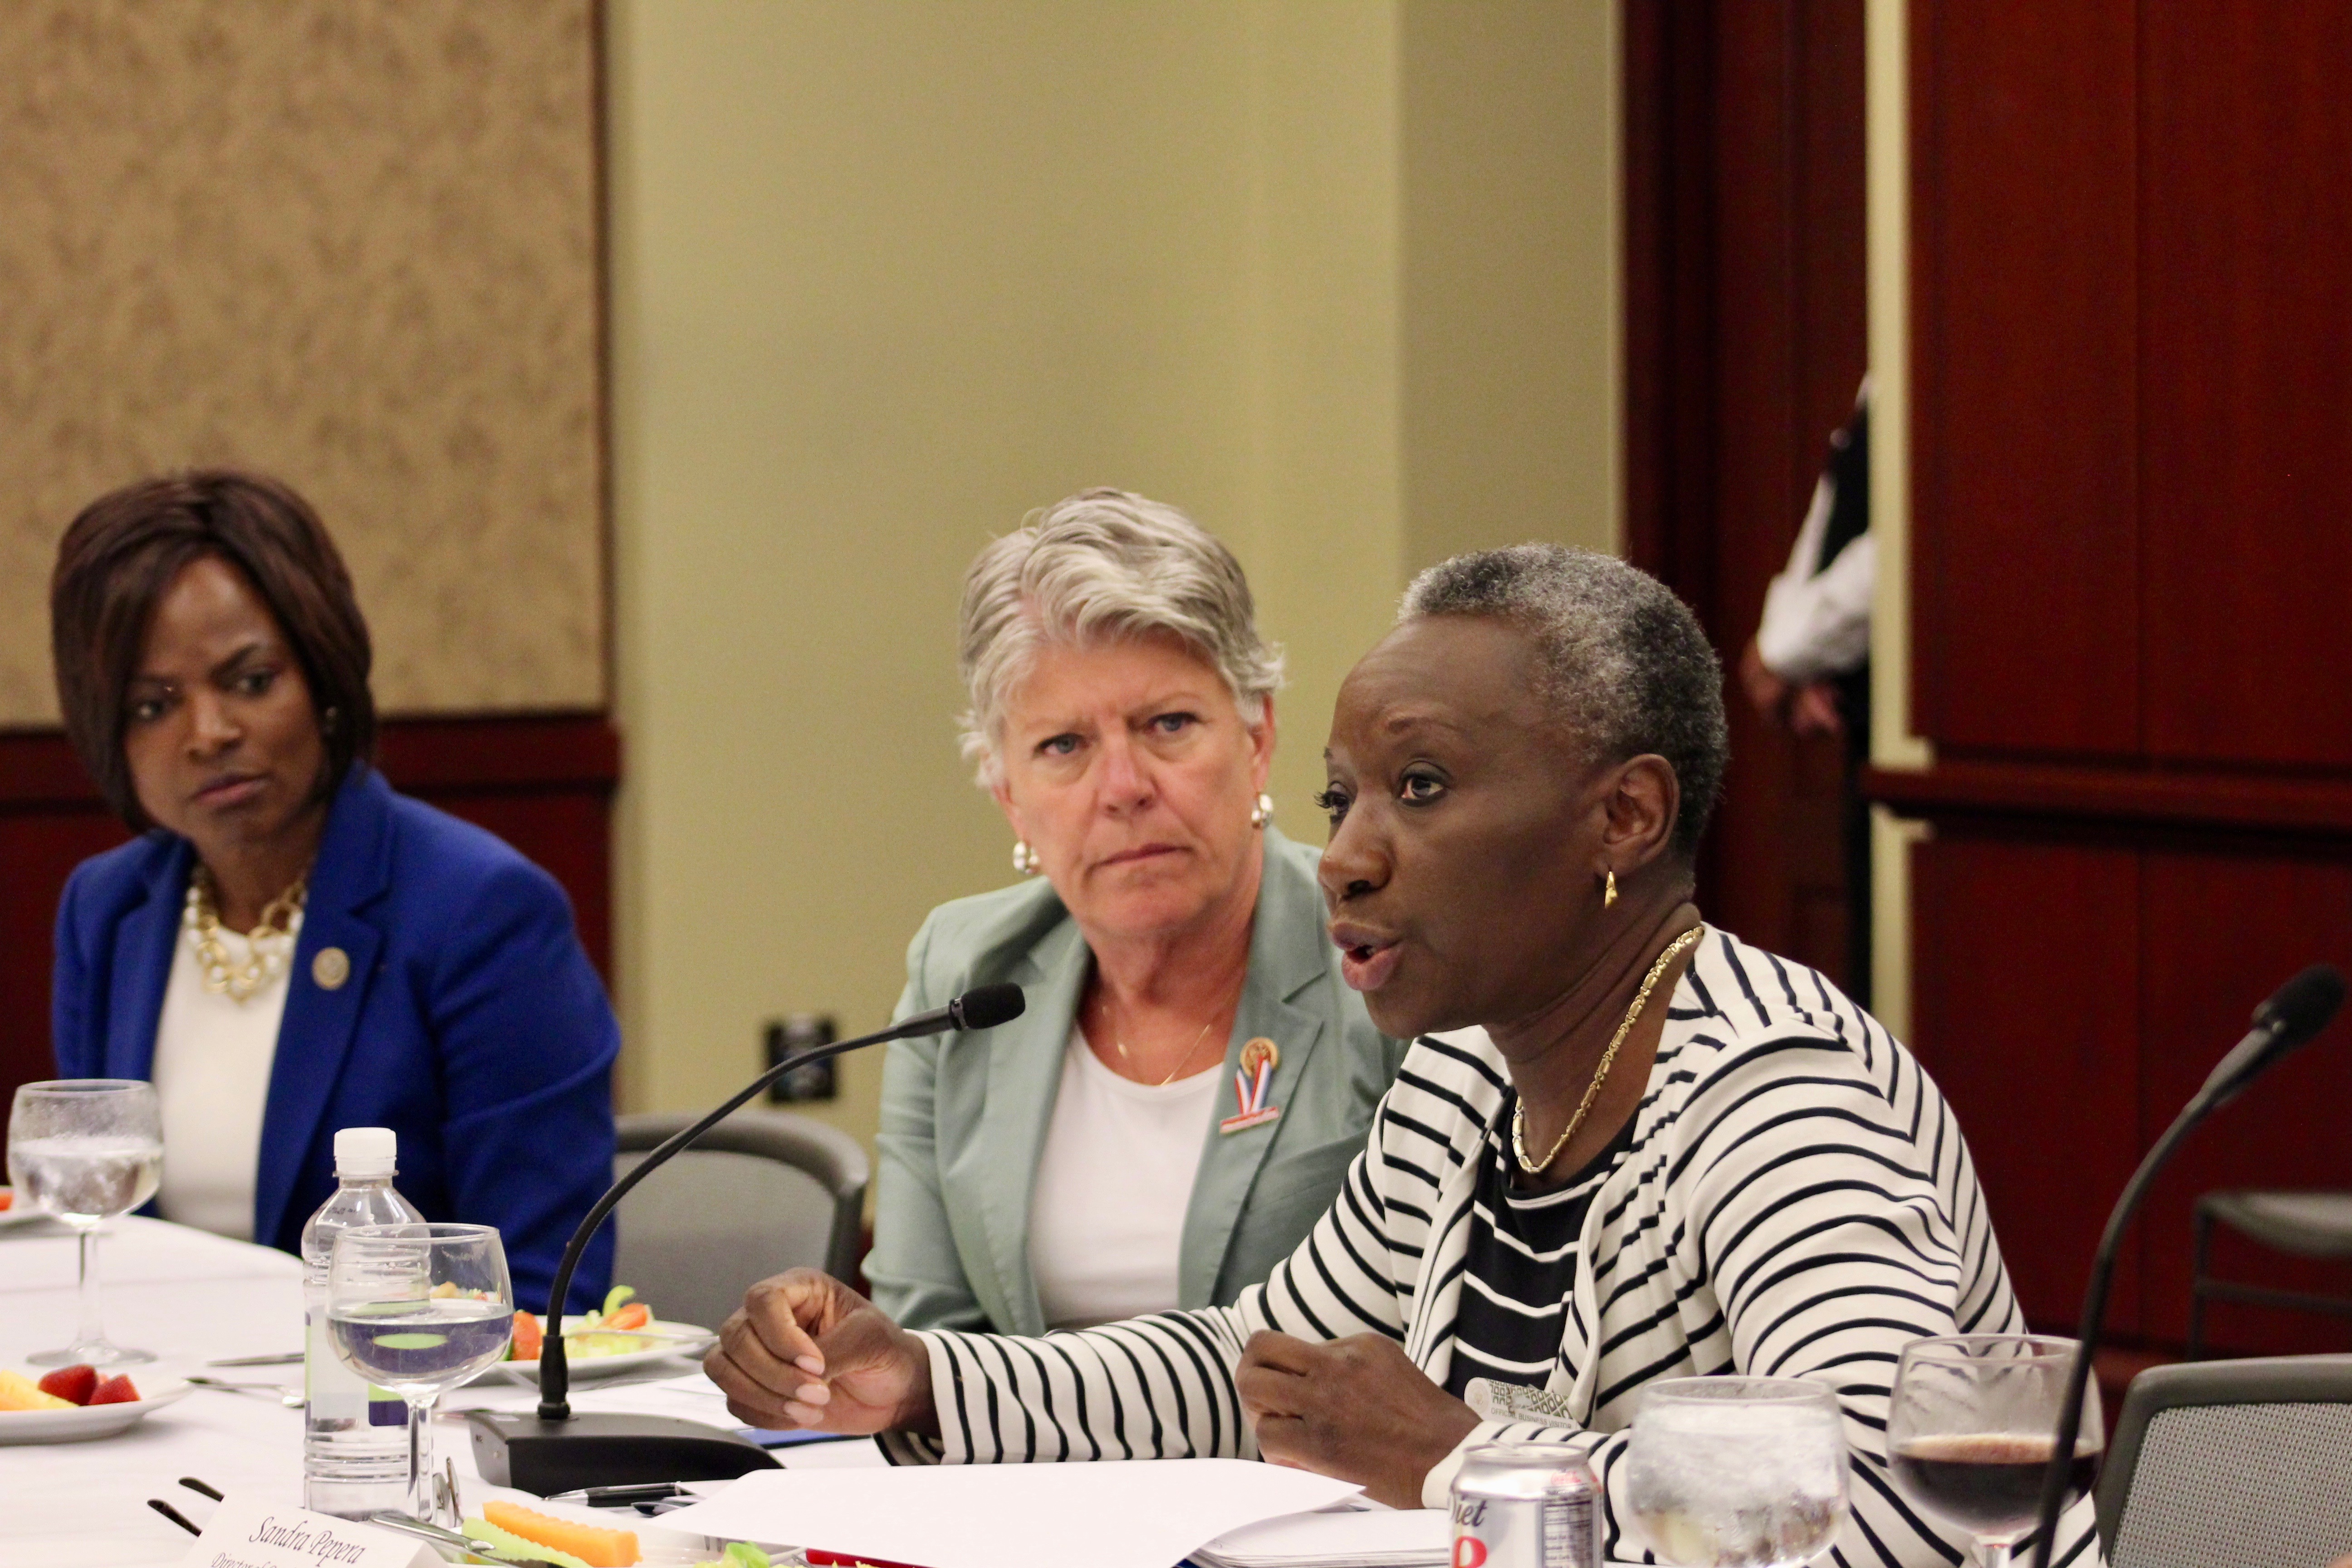 NDI's Gender, Women and Democracy Director Sandra Pepera discusses violence against women in Syria and post-conflict zones. On far left is Rep. Val Demings (FL) with Rep. Julia Brownley (CA) next to Pepera.